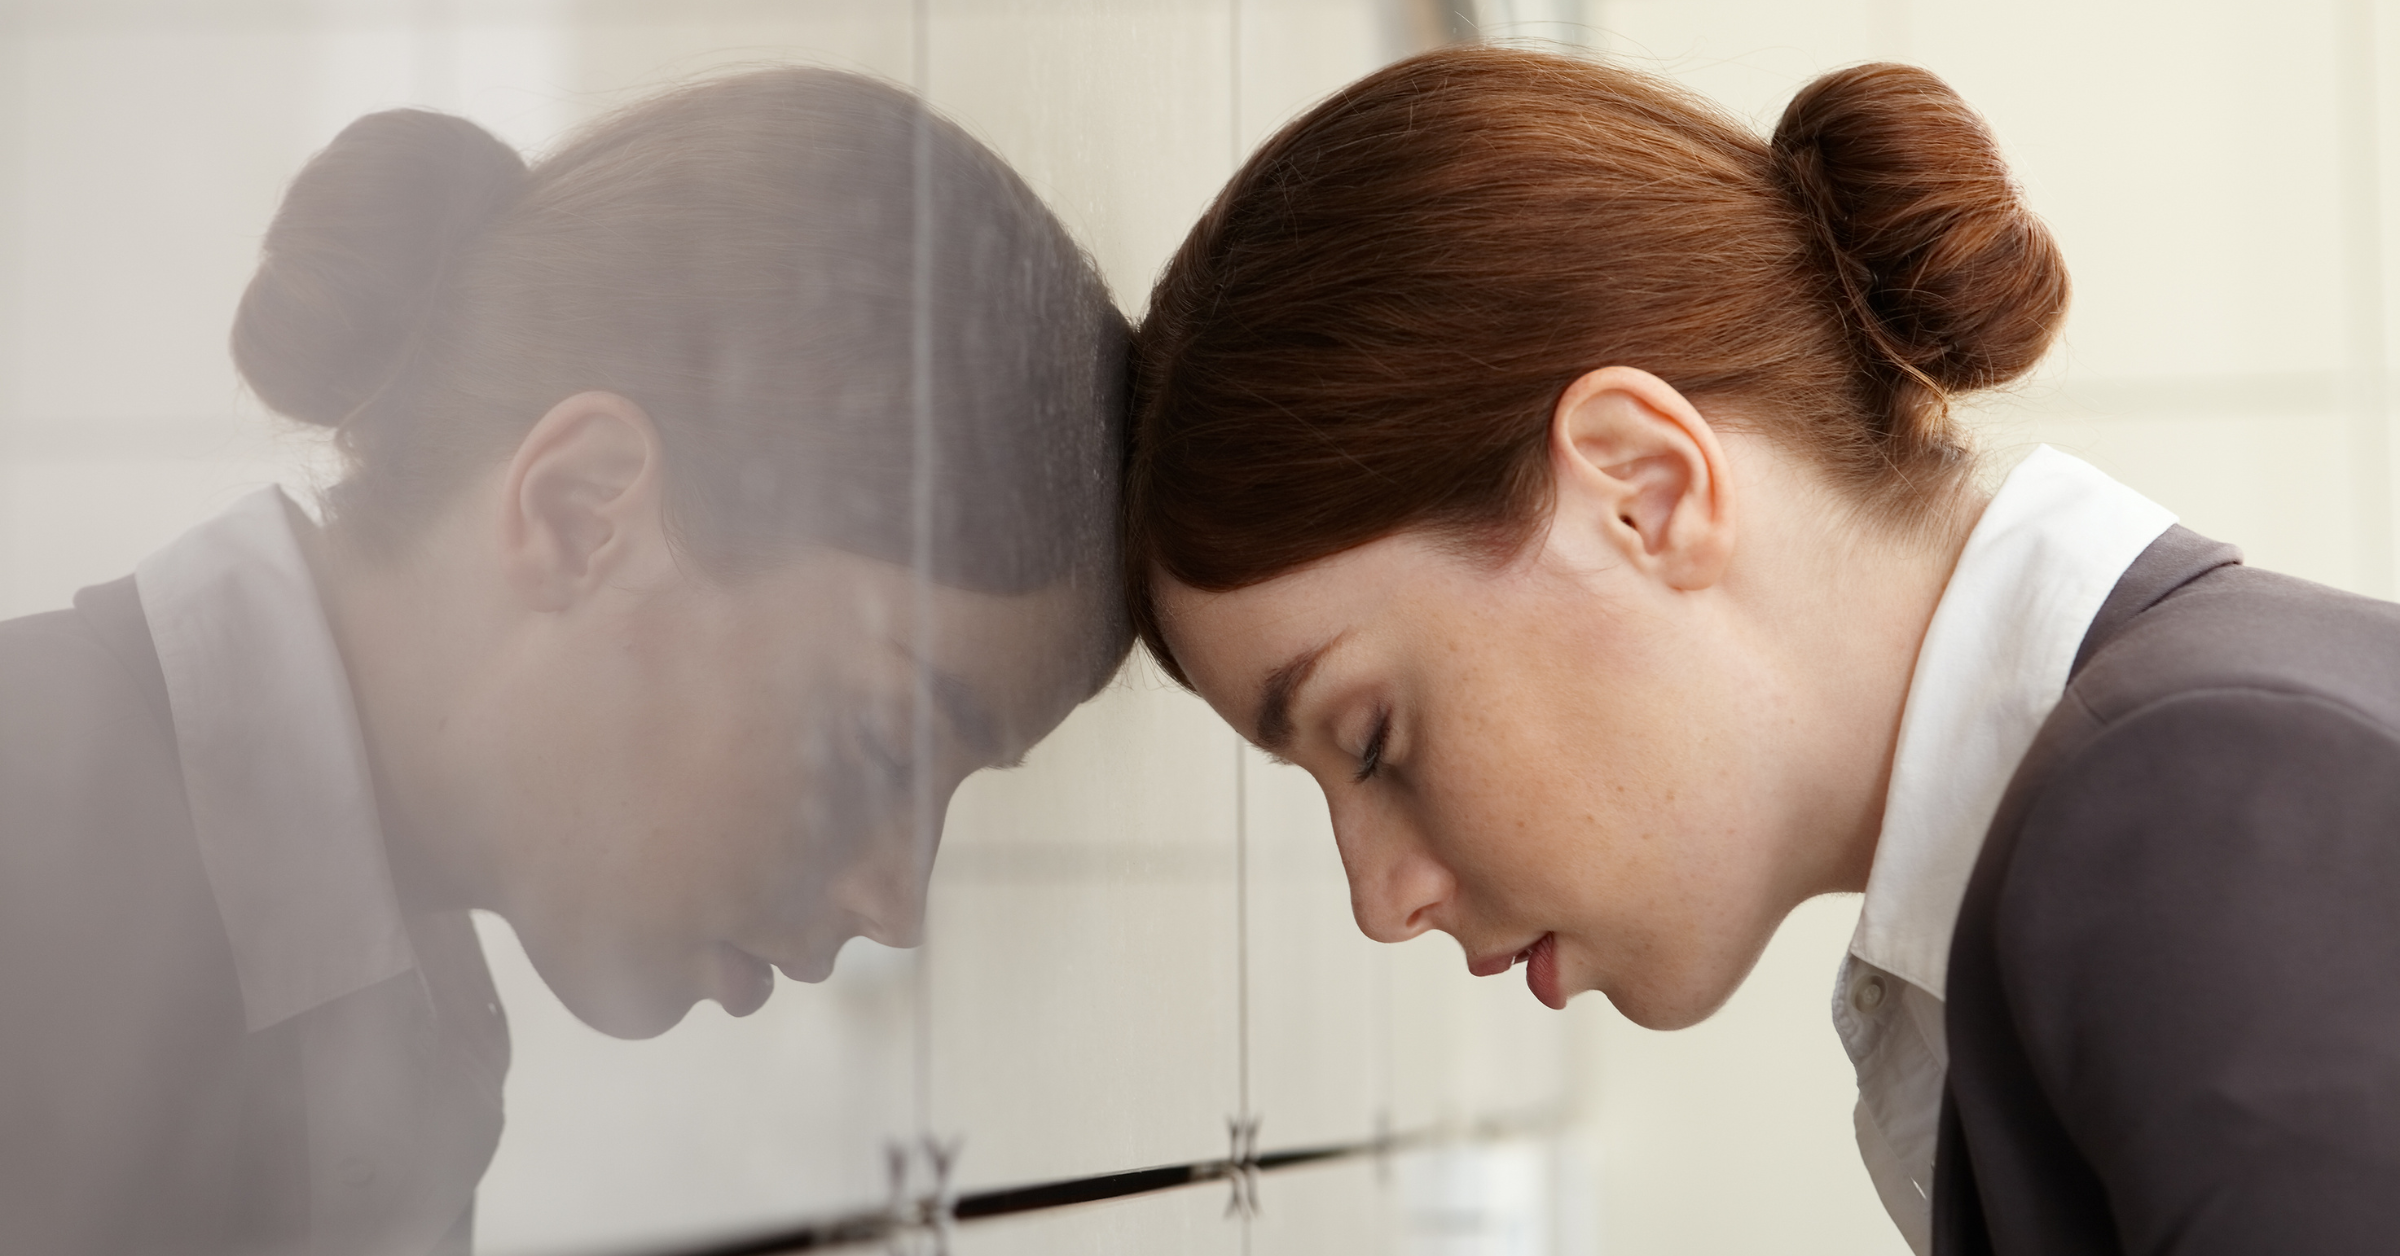 A woman placed her head to the mirrored wall, seems to be in pain